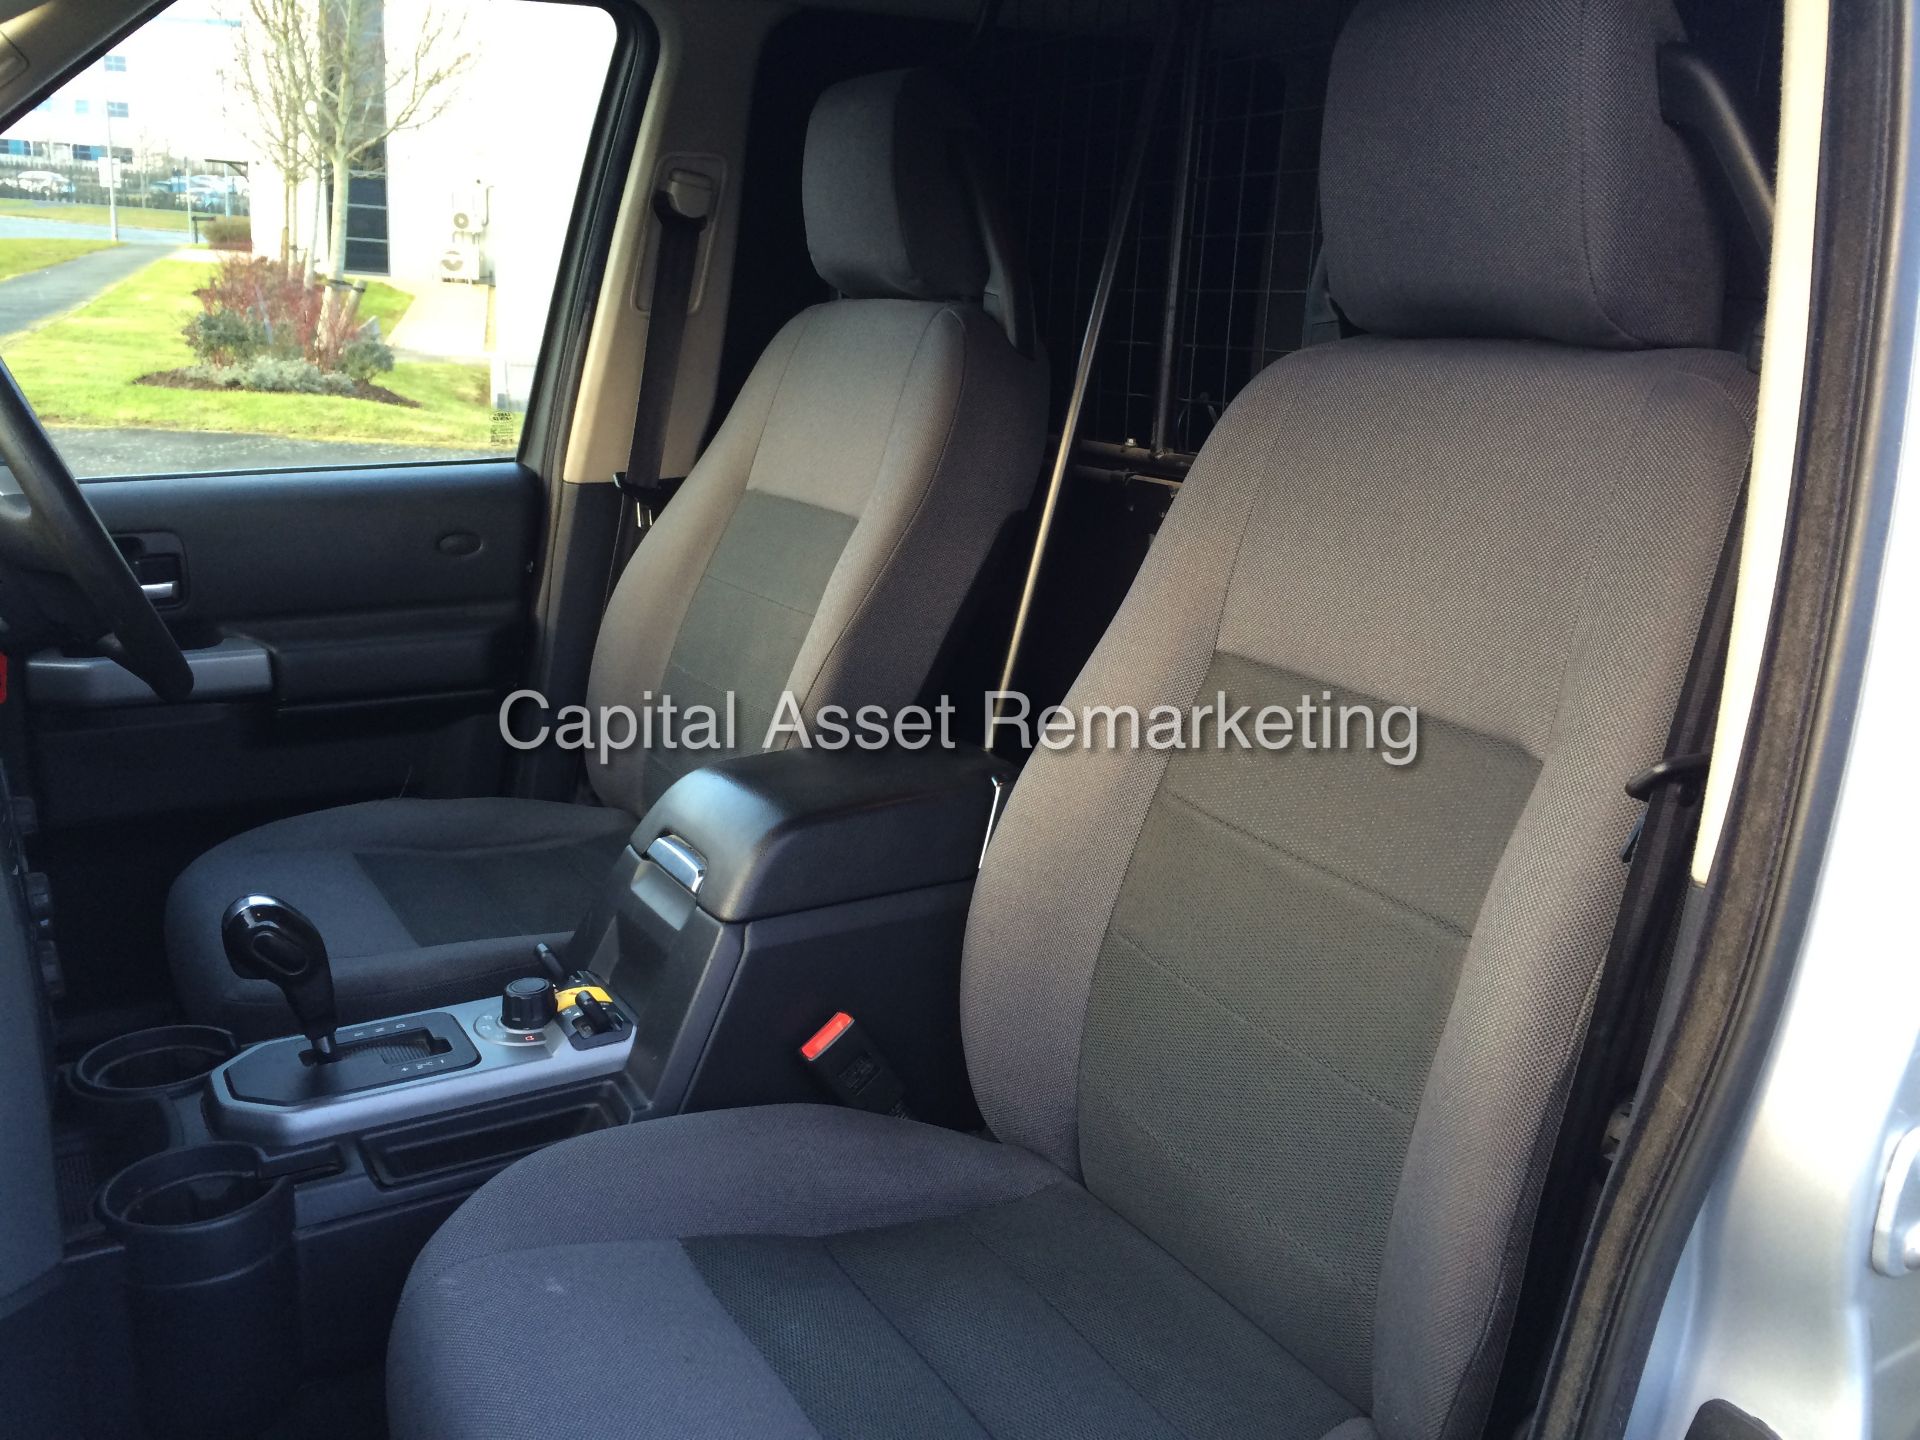 LANDROVER DISCOVERY 3 "TDV6" AUTOMATIC - 1 PREVIOUS OWNER FROM NEW - AIR SUSPENSION - PRIVACY GLASS! - Image 14 of 18